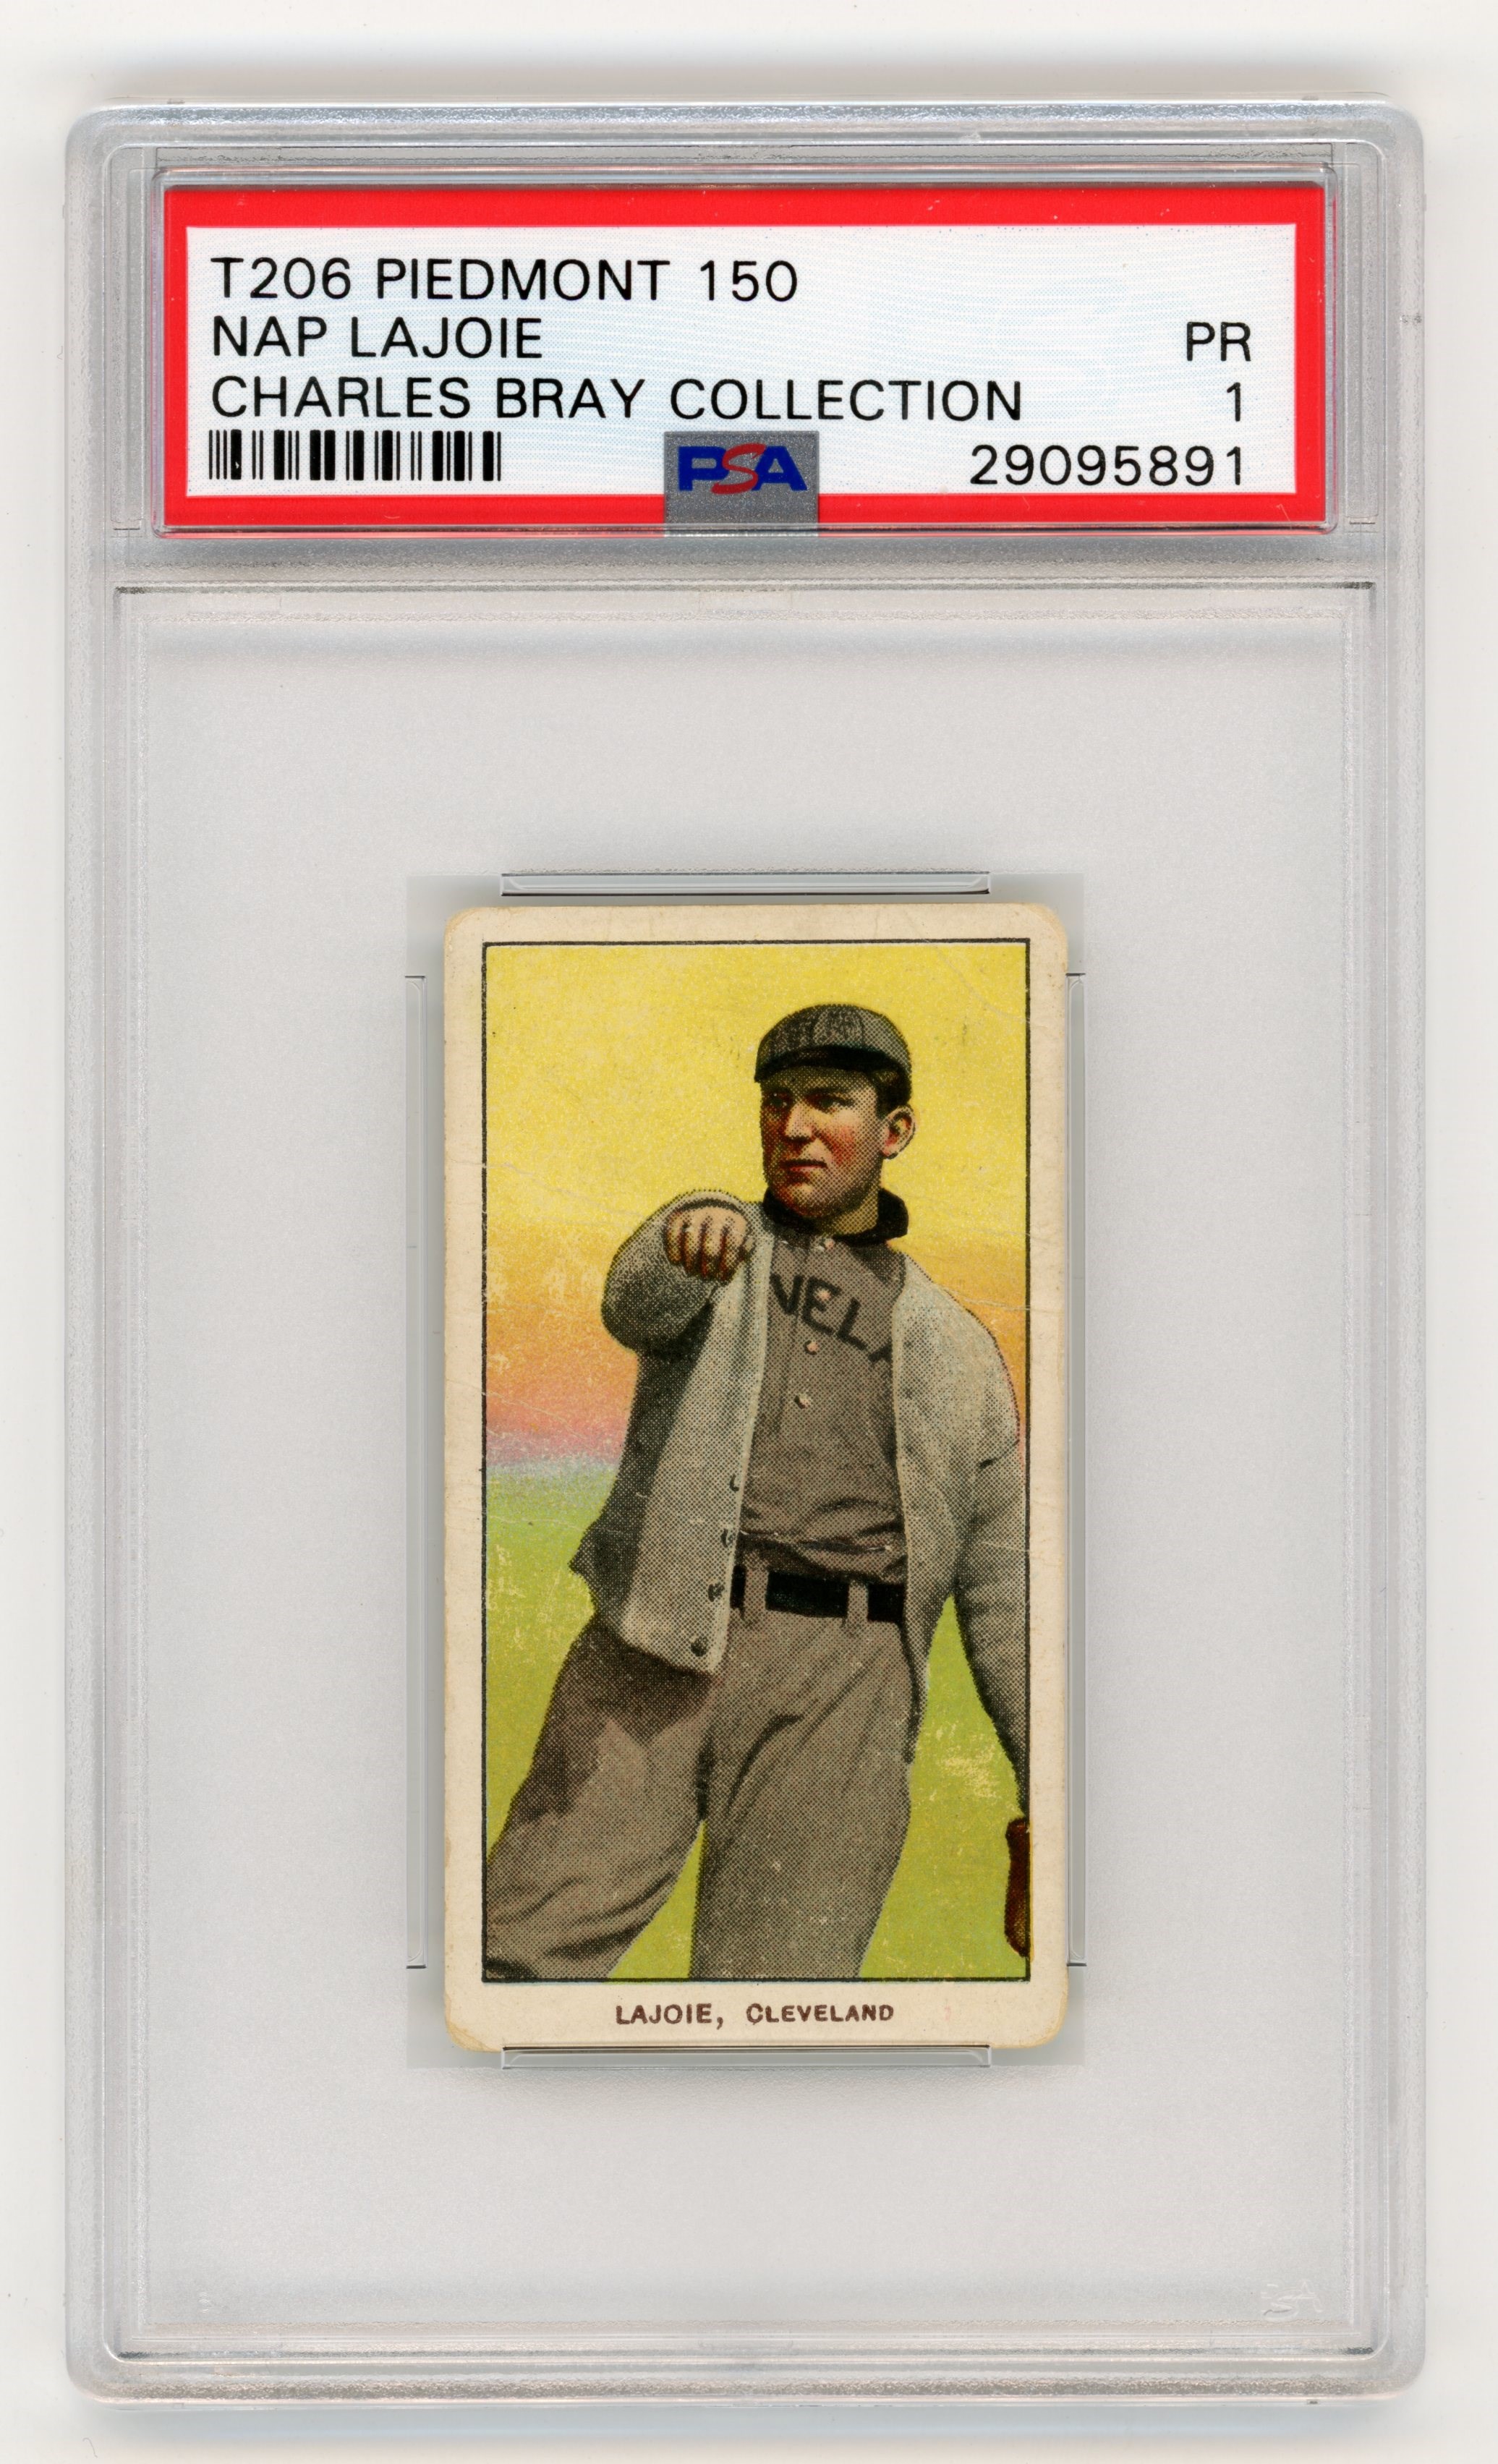 Baseball and Trading Cards - T206 Piedmont 150 Nap Lajoie PSA 1 From Charles Bray Collection